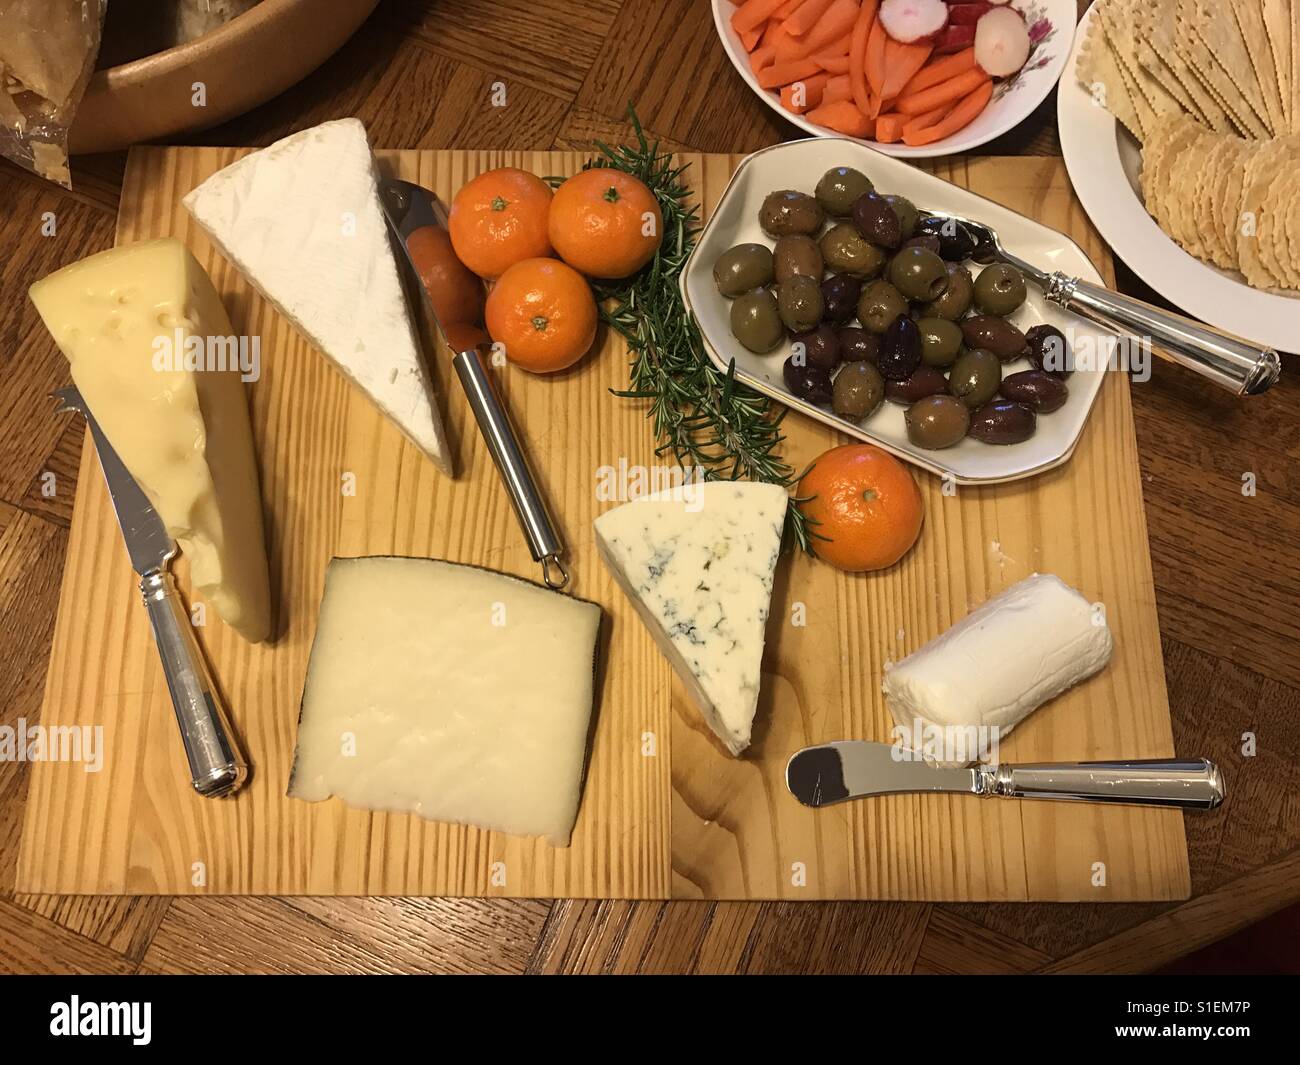 Assortment of cheeses, with dish of olives and few tangerines on wooden serving board with knives and sprig of rosemary. From above perspective. Stock Photo